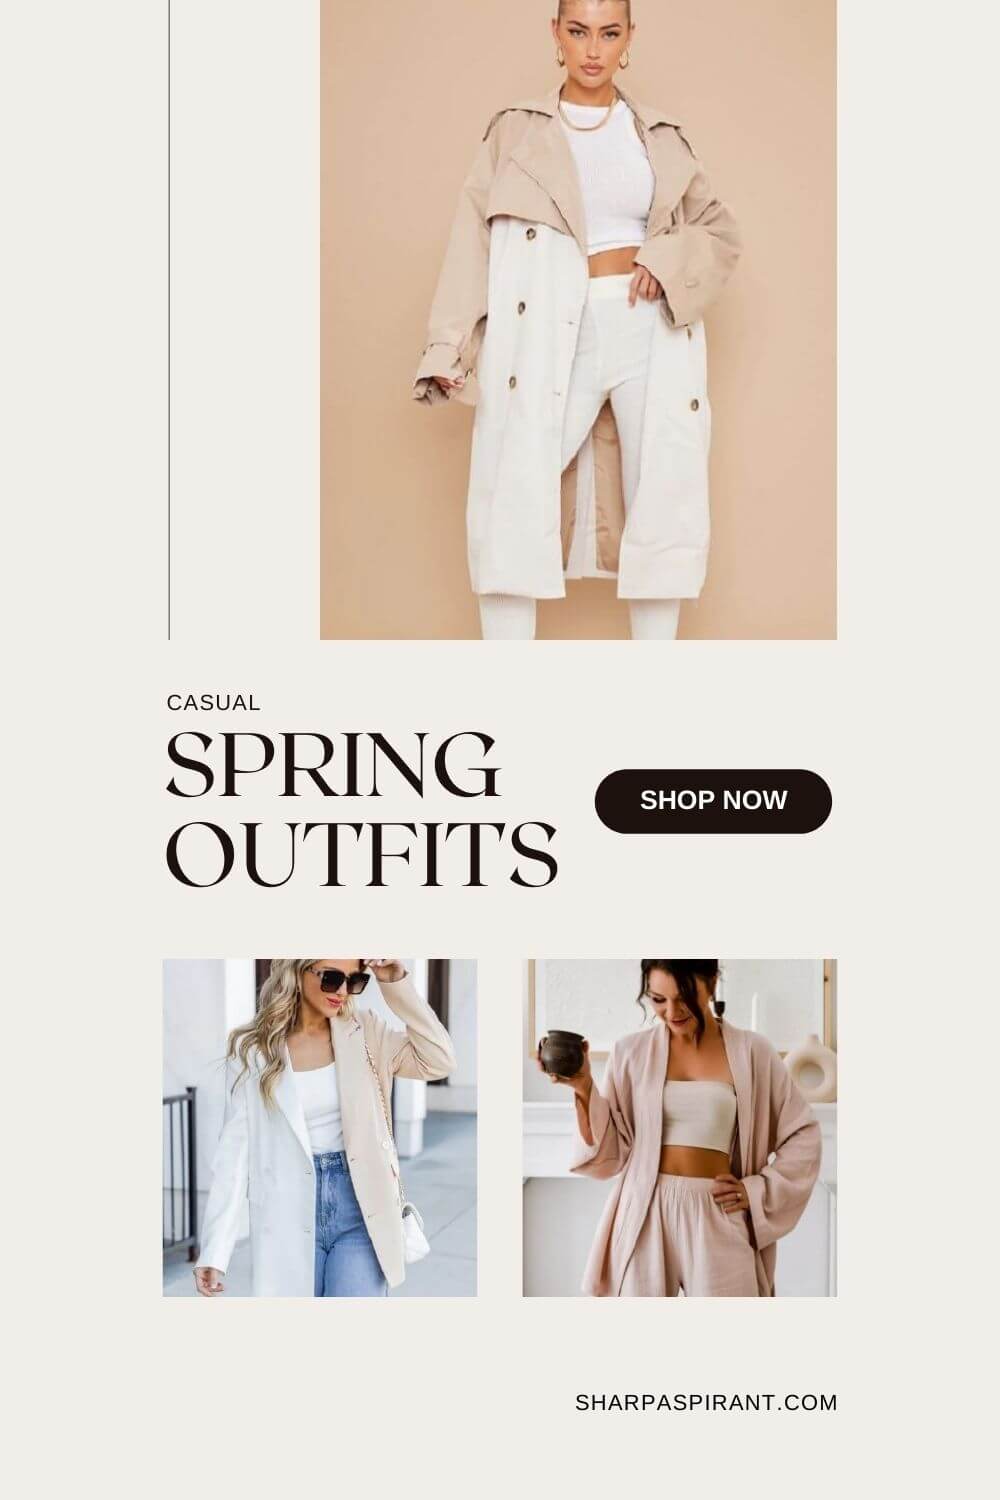 Get inspired with cute spring outfits perfect for any occasion. From jumpsuits to midi skirts, update your wardrobe with fresh ideas.